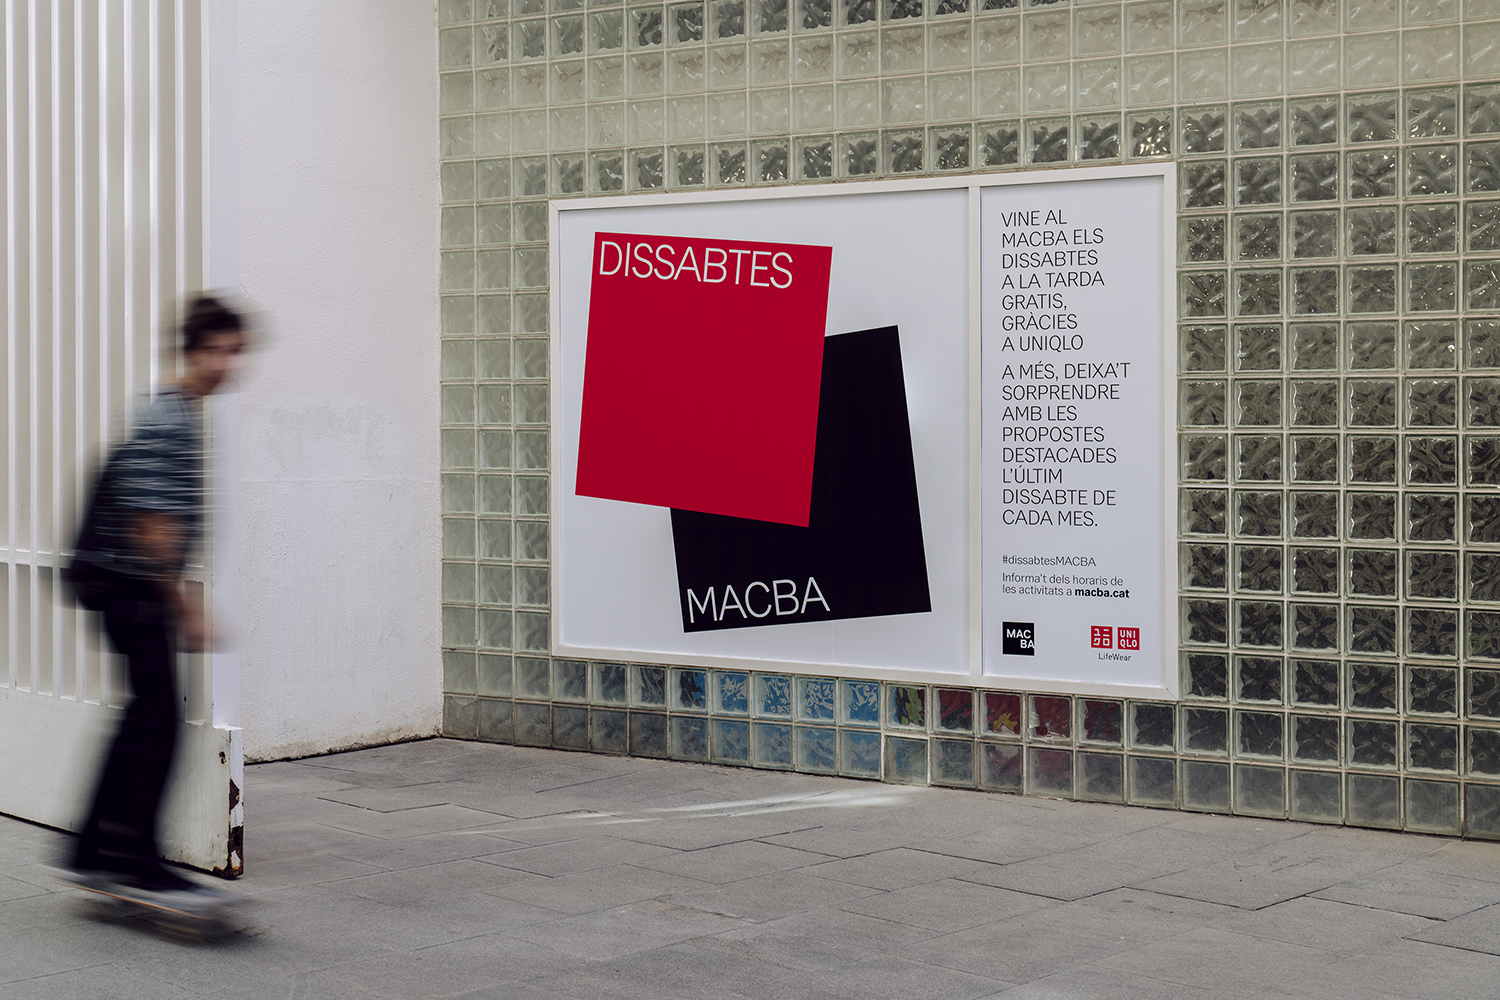 Logo, posters, flyers and banners designed by Hey for Dissabtes MACBA, a free Saturday's event at MACBA and a collaboration with UNIQLO